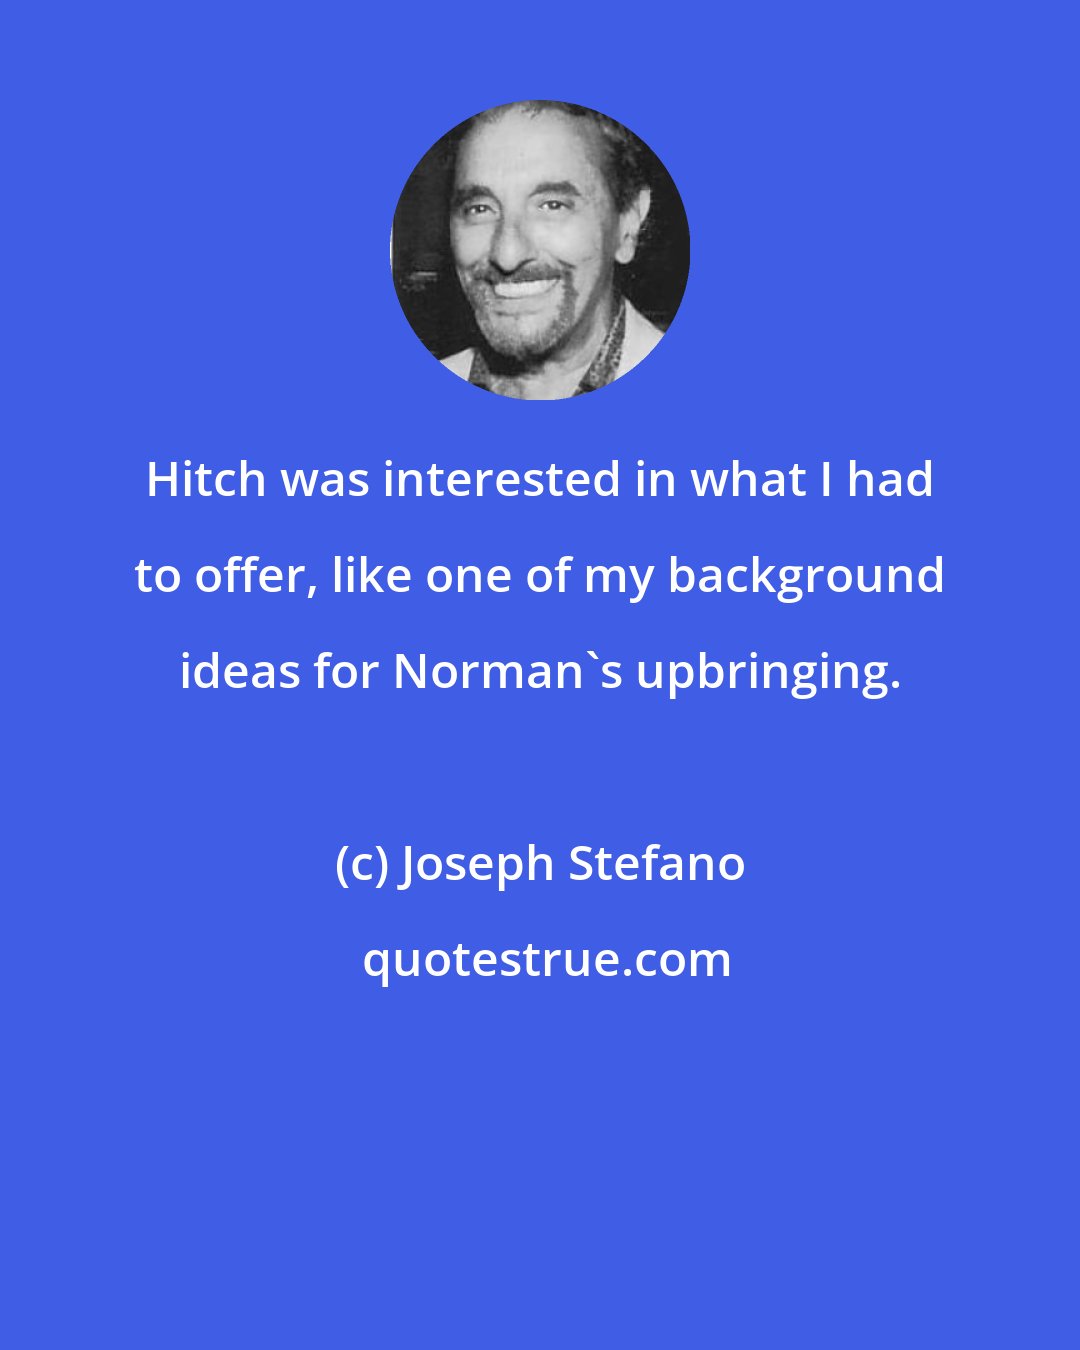 Joseph Stefano: Hitch was interested in what I had to offer, like one of my background ideas for Norman's upbringing.